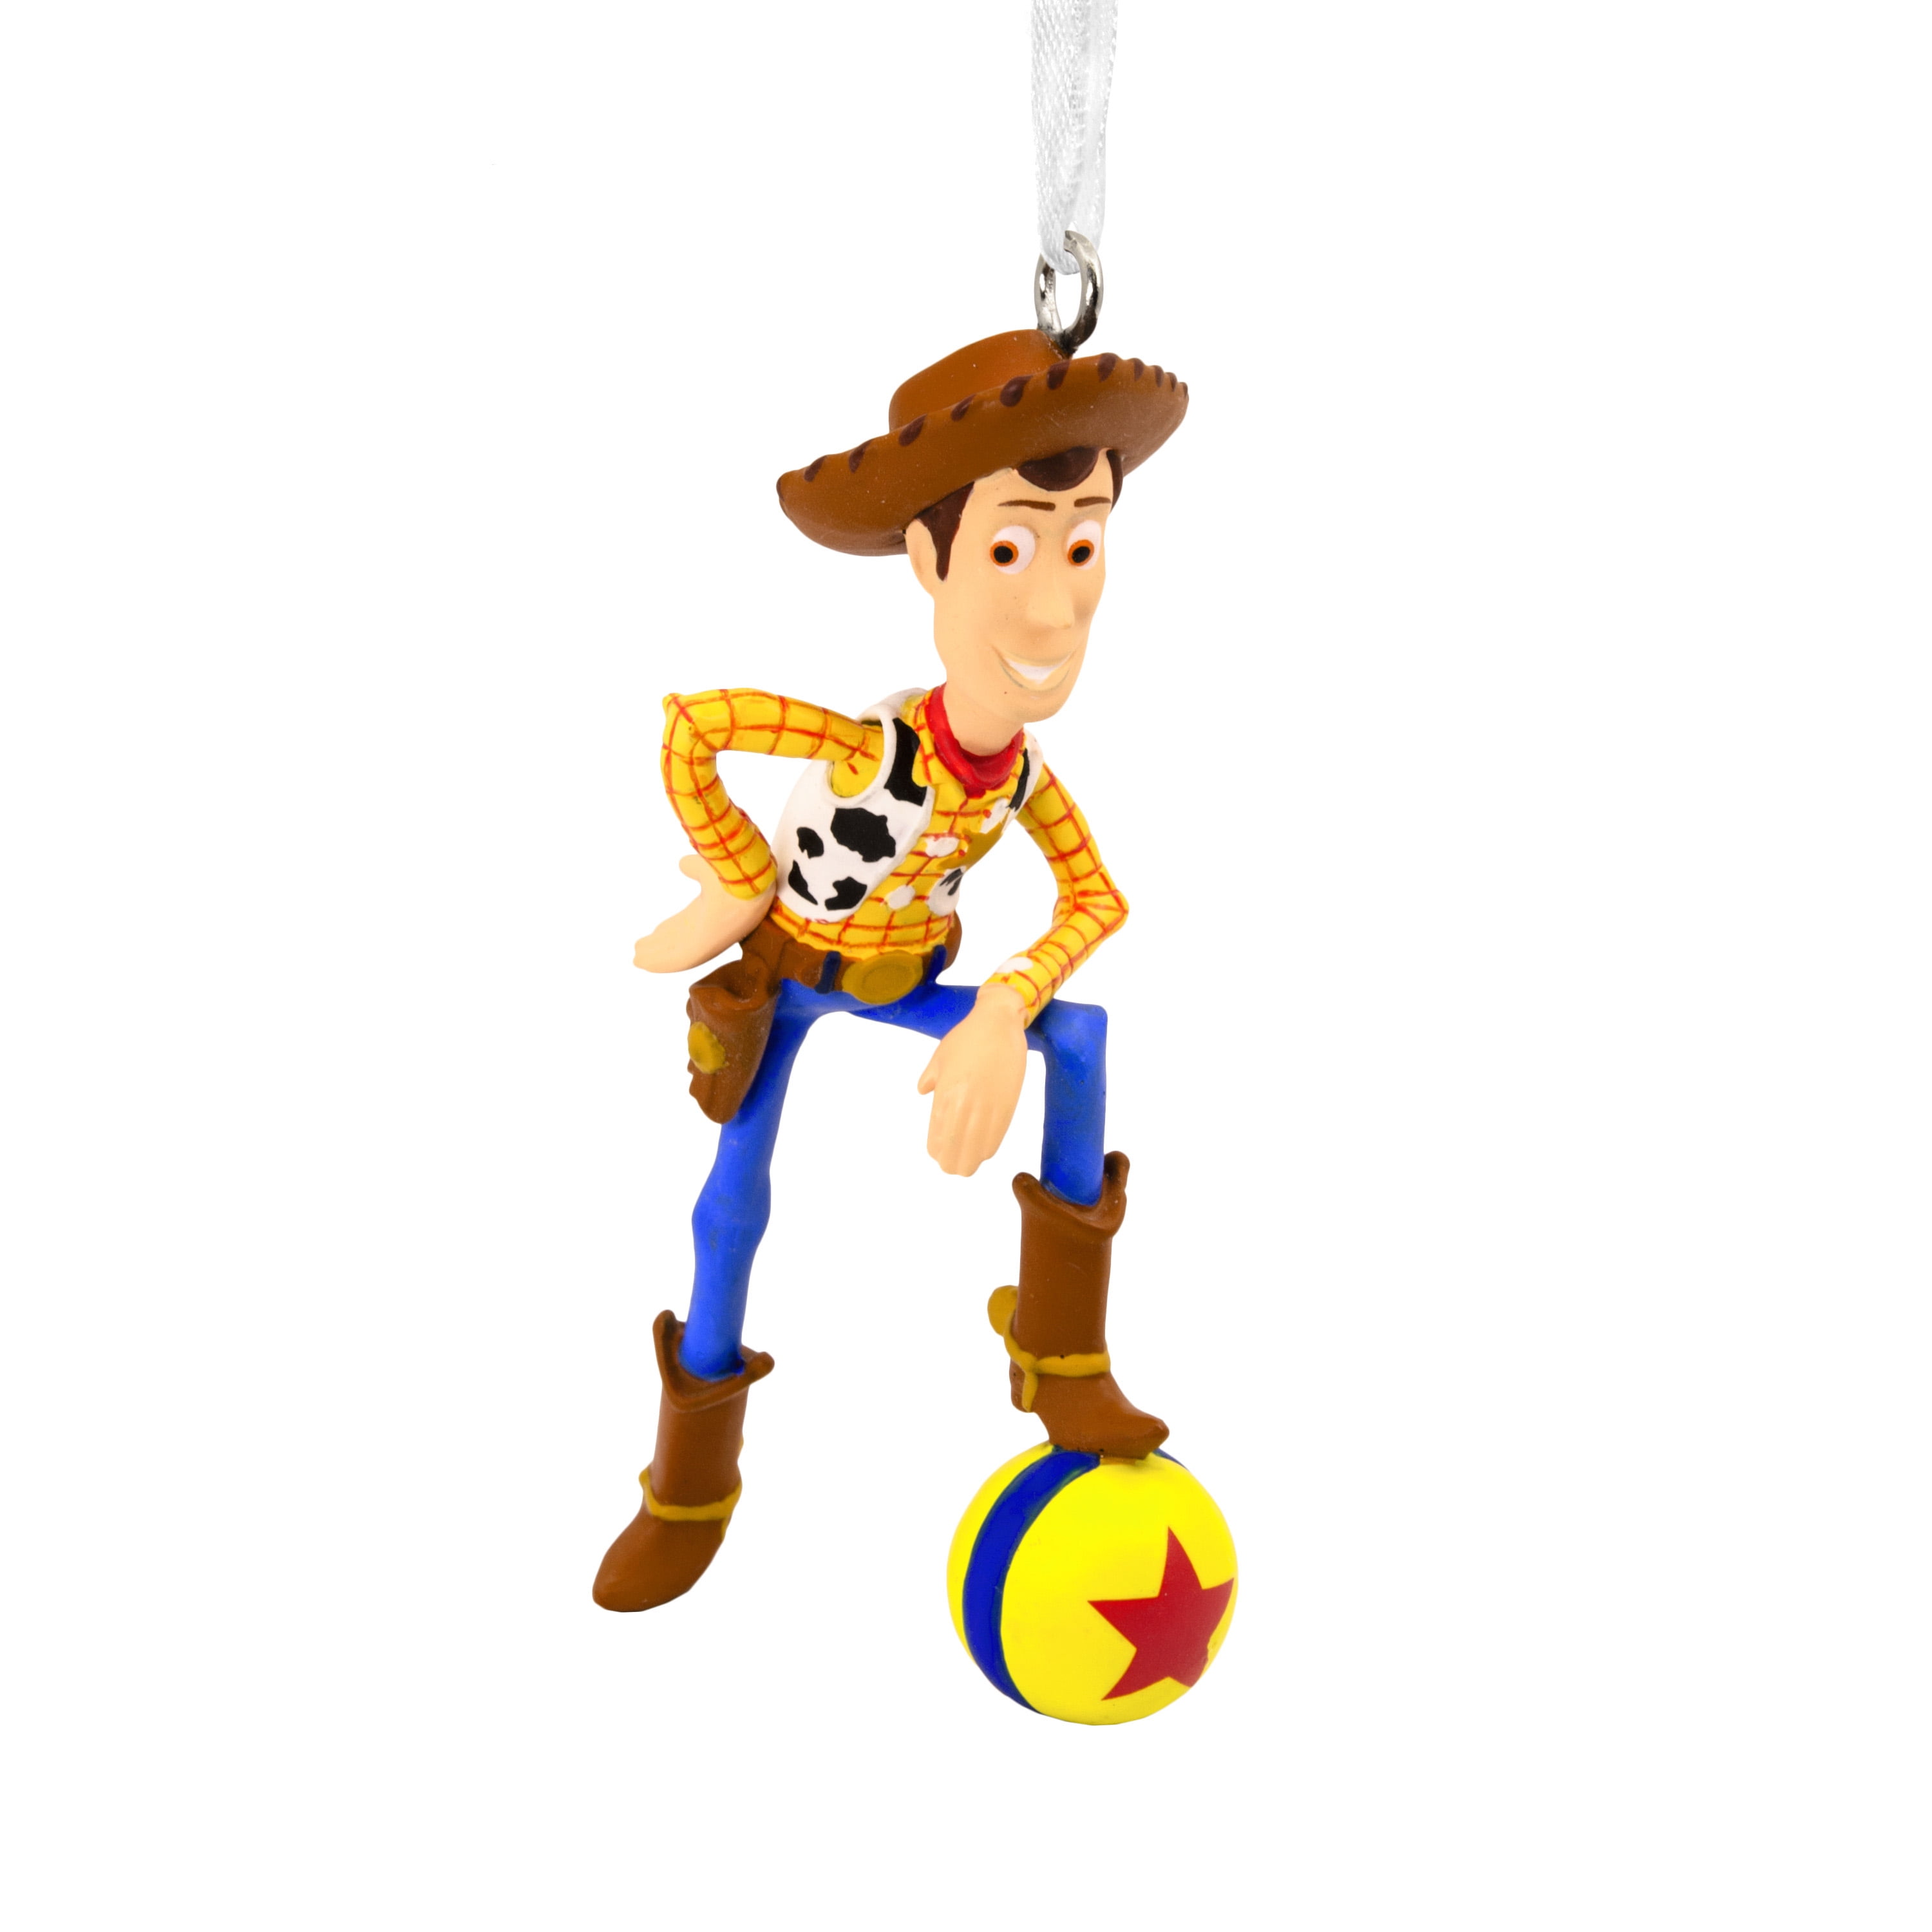 Details about   DISNEY TOY STORY 4 WOODY & BO PEEP Resin CHRISTMAS XMAS SKETCHBOOK ORNAMENT NEW! 